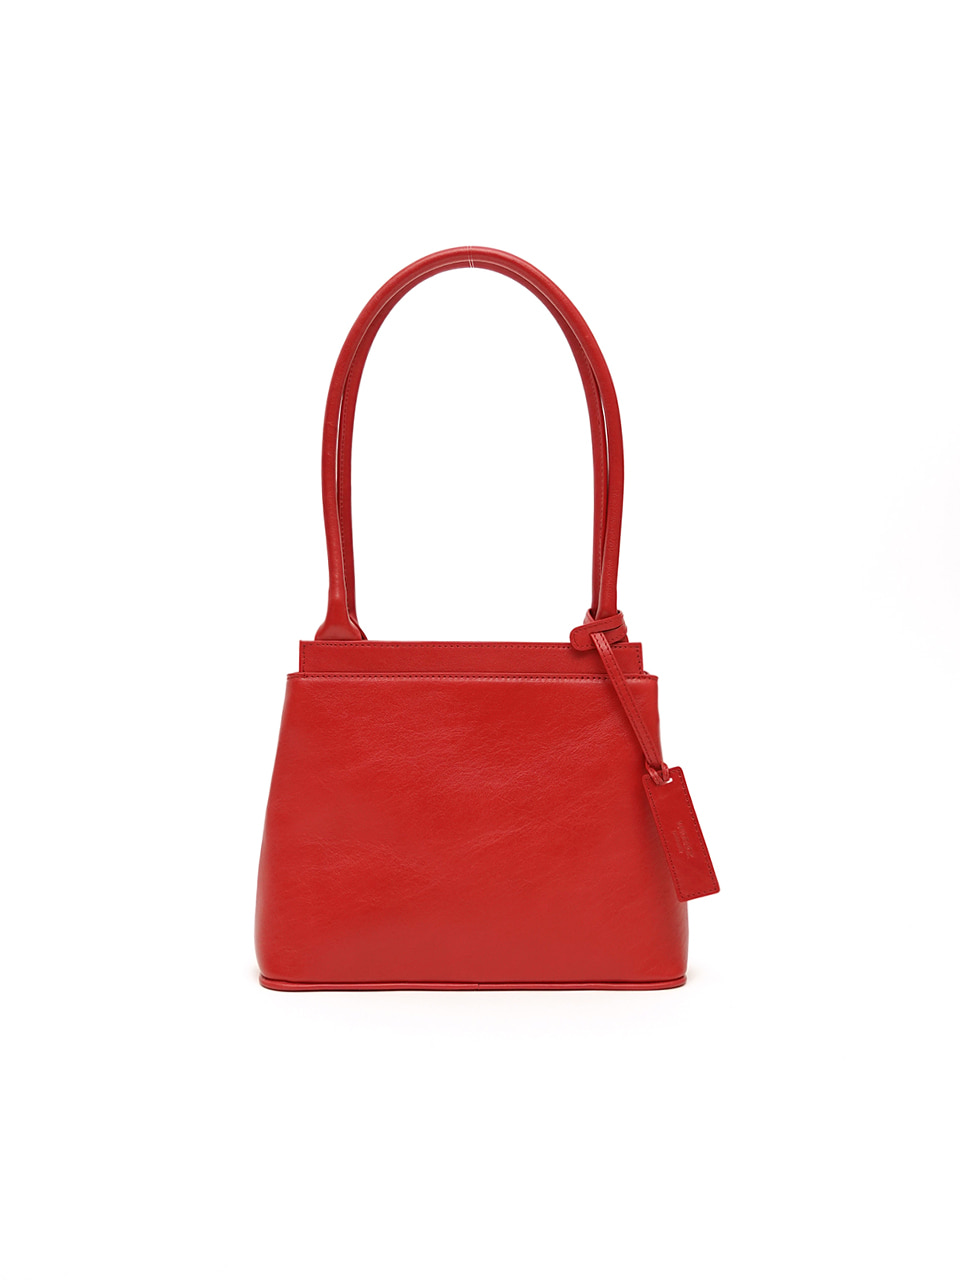 [New 10% off] Lano bag / red